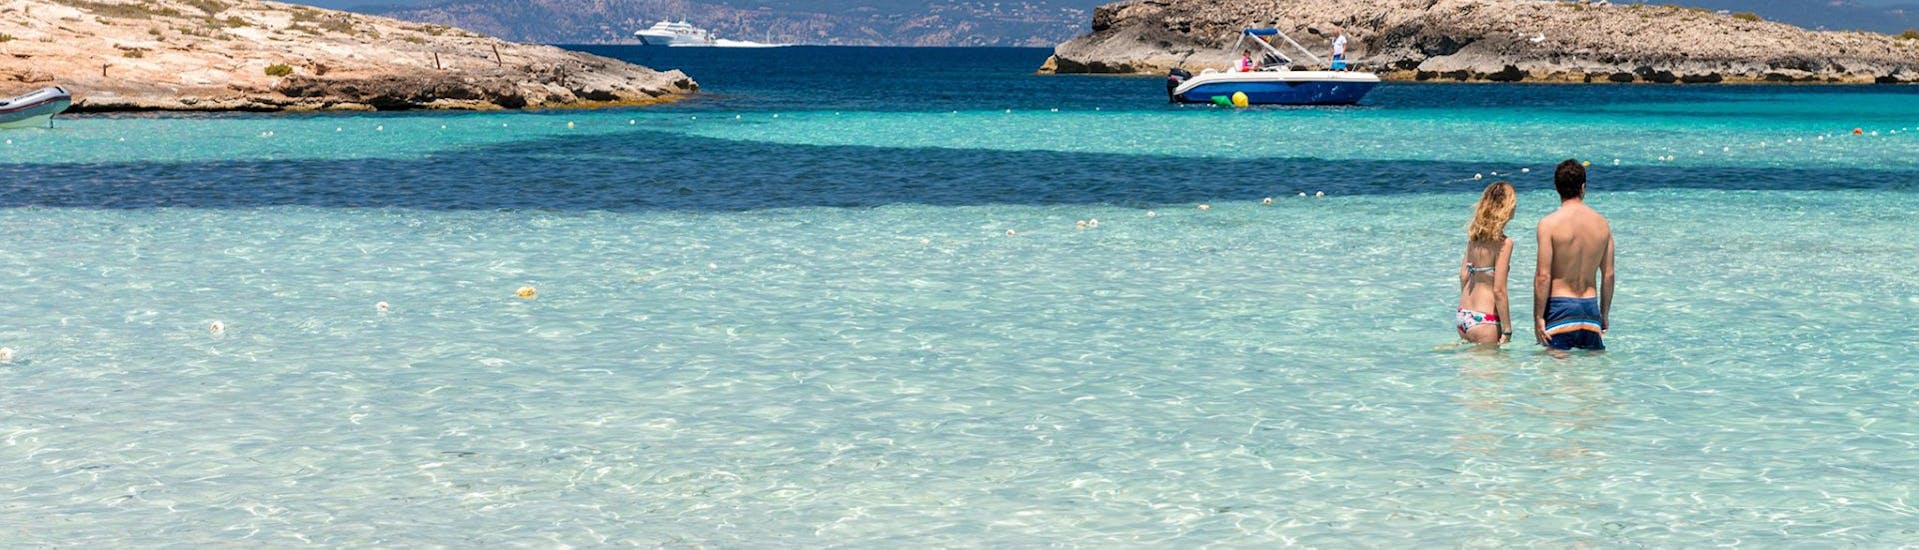 People are in the water on the beautiful beach you will see during the Catamaran Trip to Cala Saona or Llevant with Apéritif with Sea Experience Ibiza.